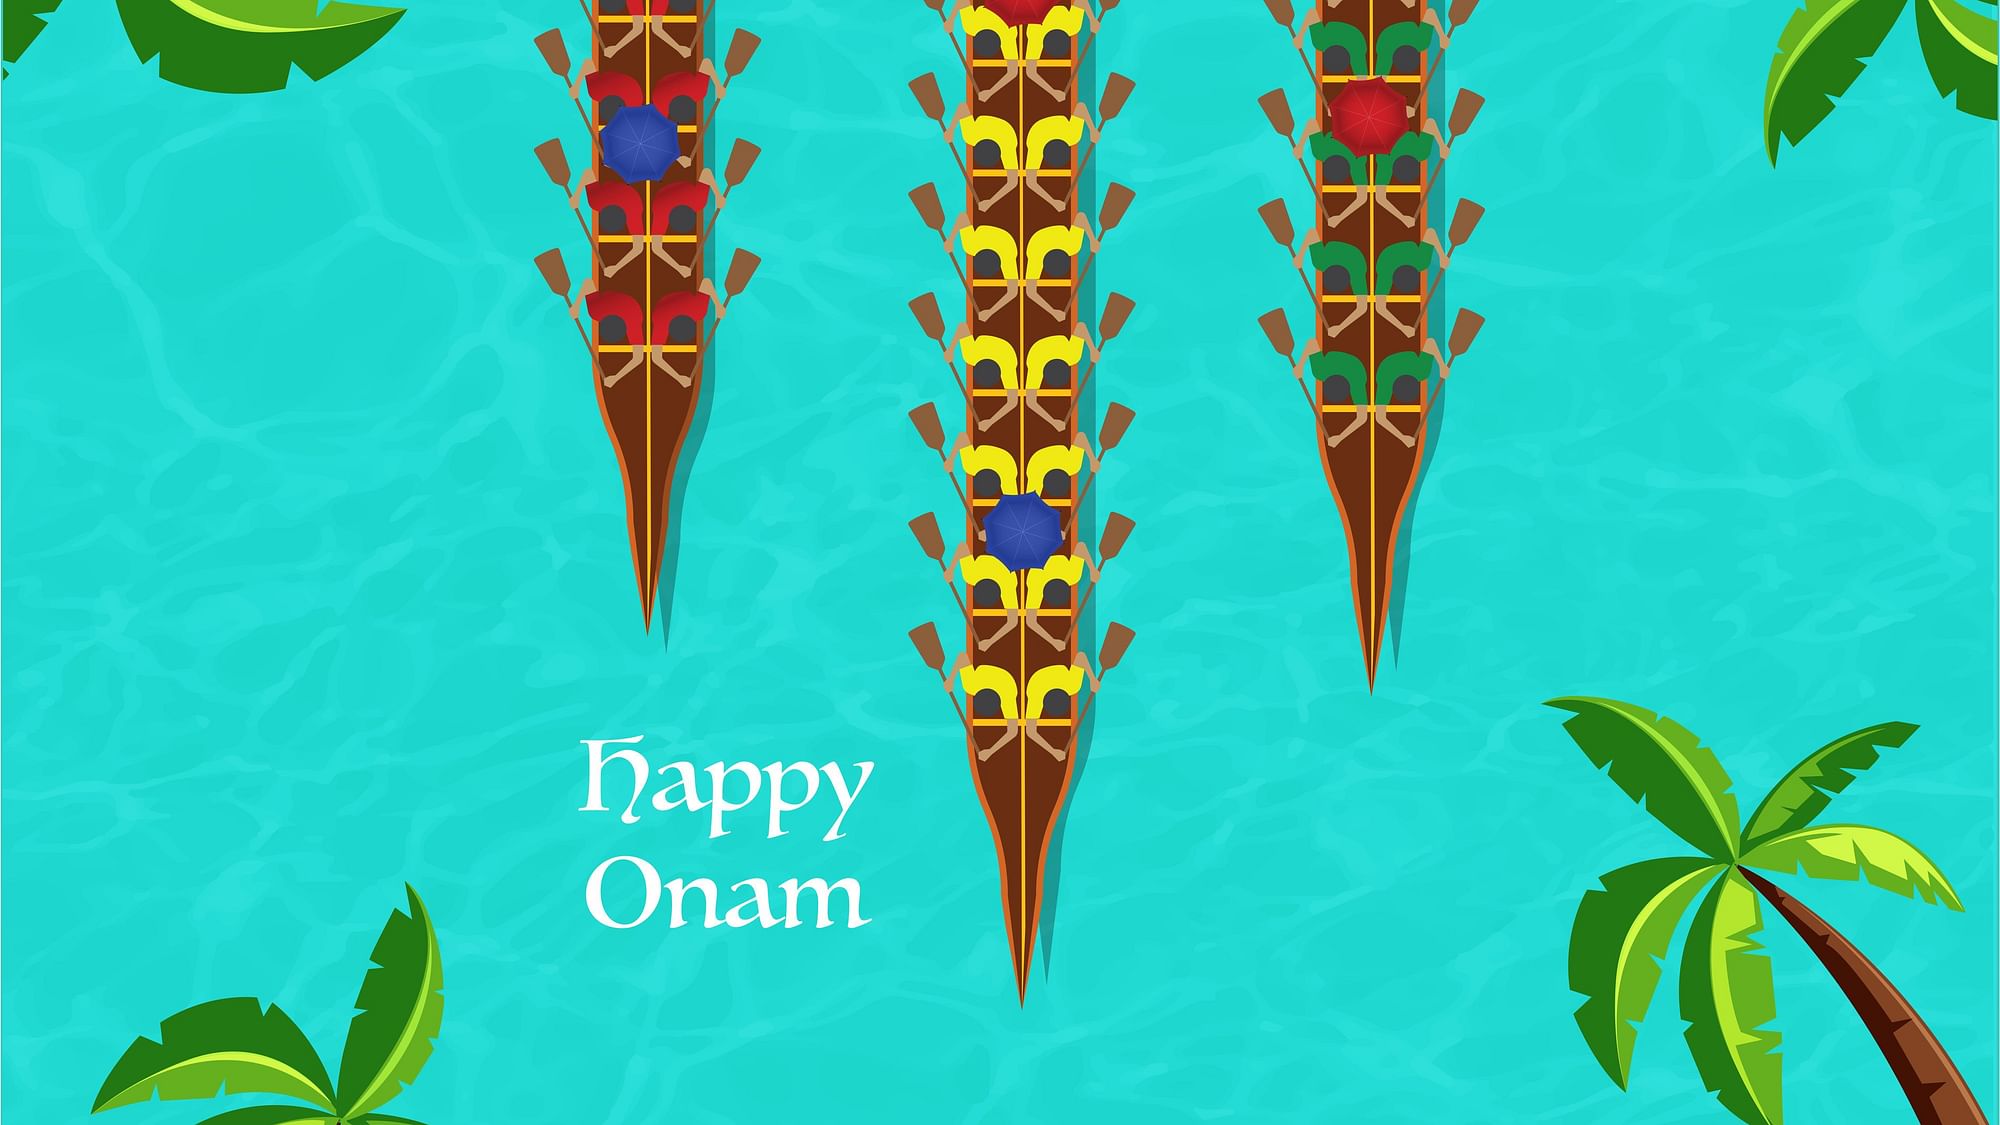 Happy Onam 2020: wishes, Images, Greetings and Quotes